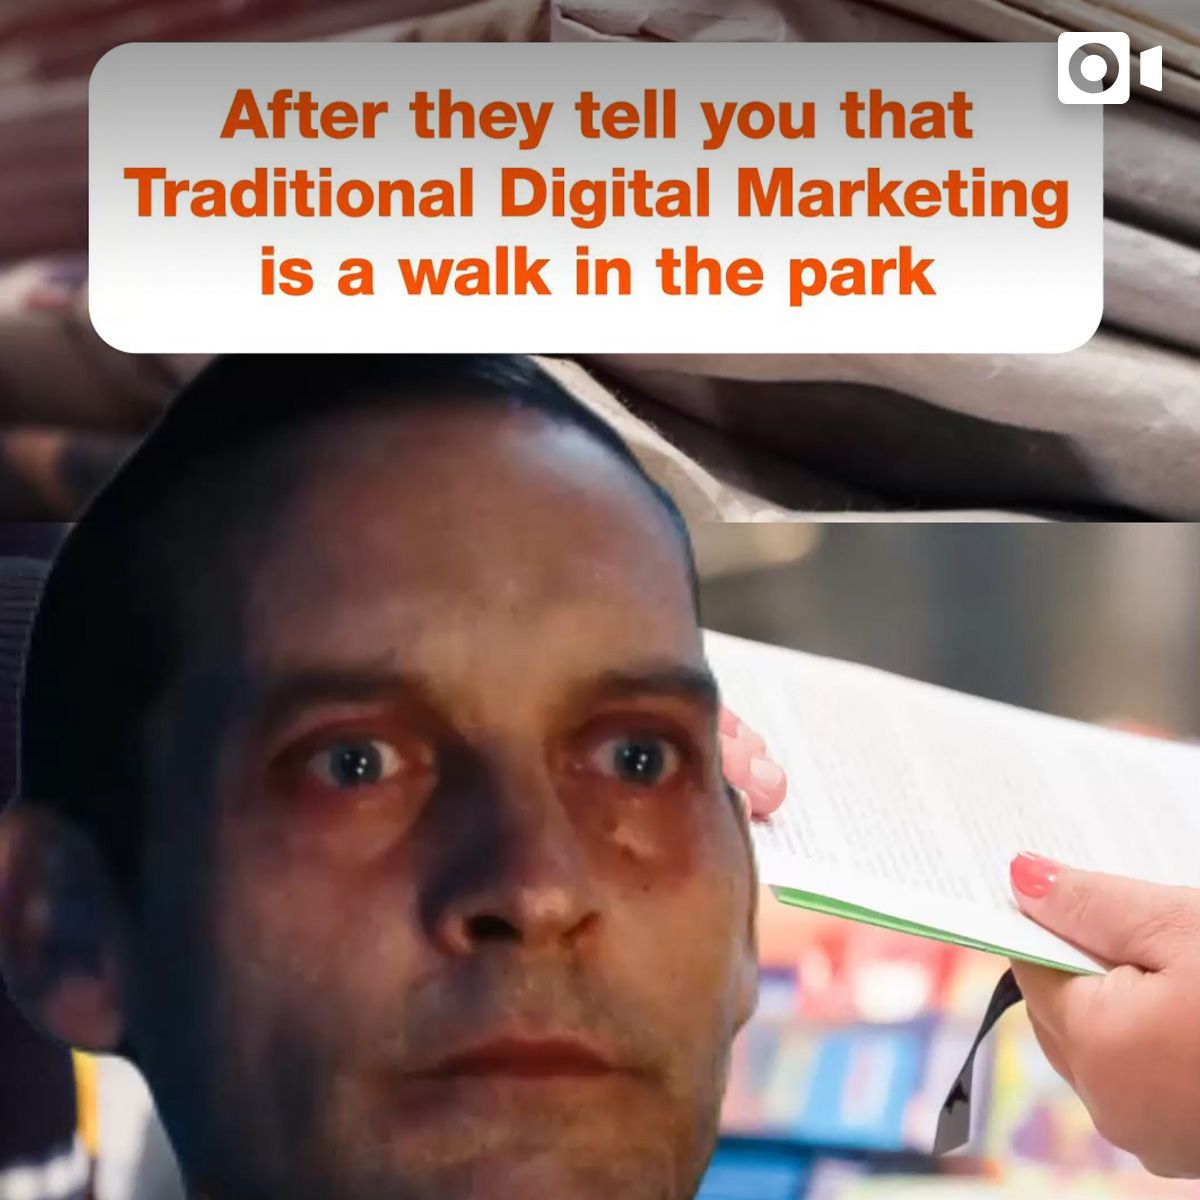 After they tell you that Traditional Digital Marketing is a walk in the park